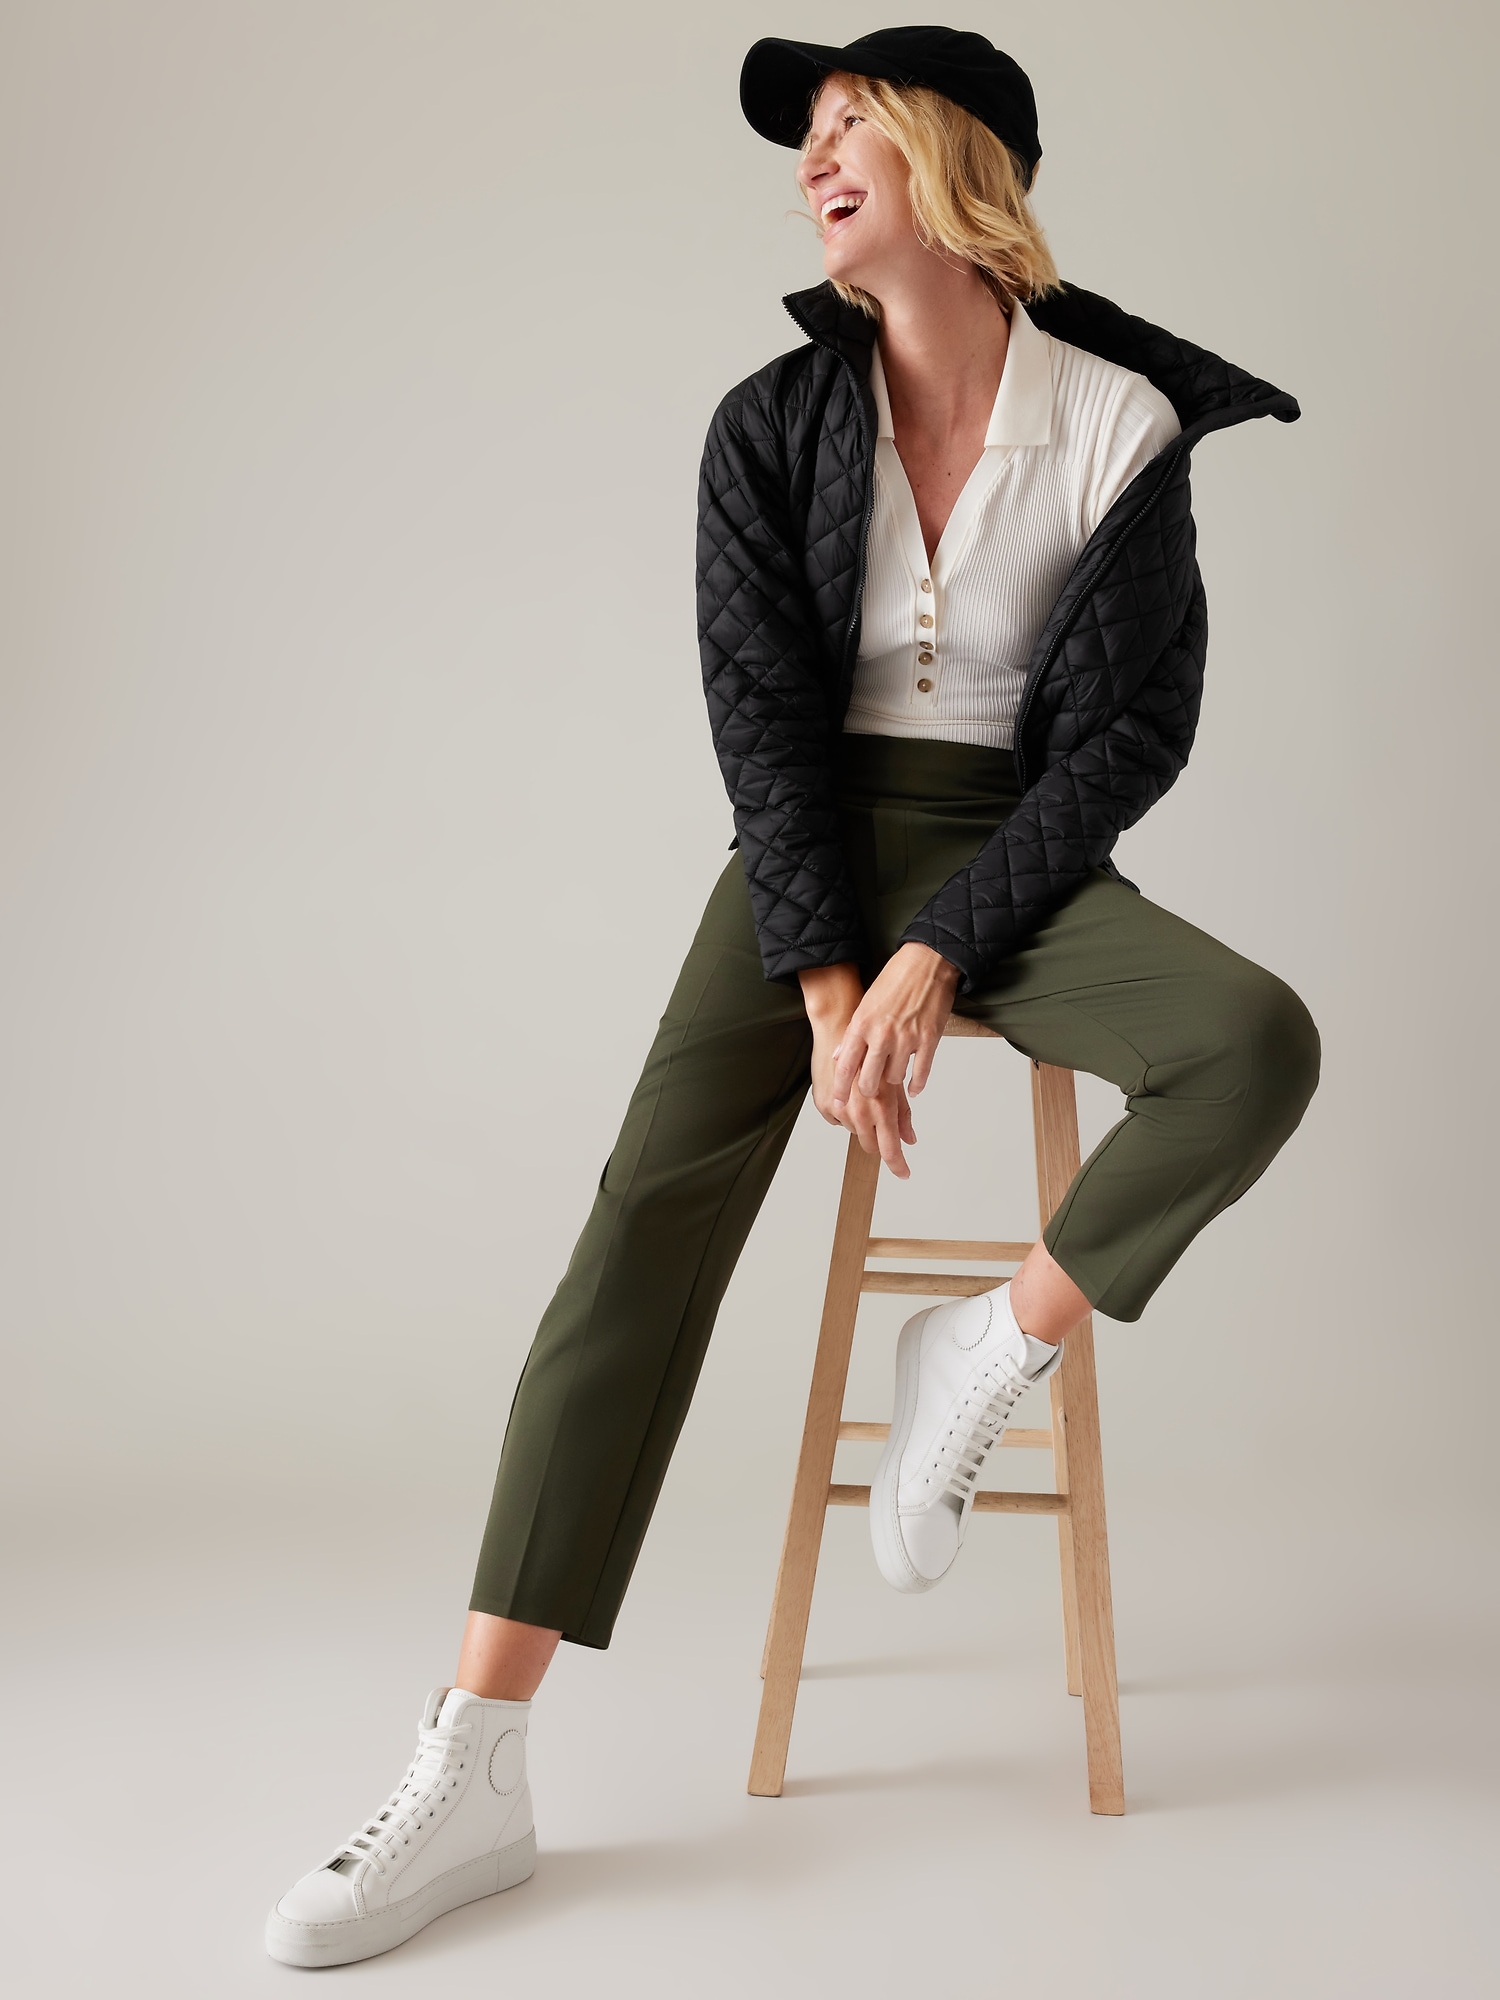 Invest in yourself with the @Athleta endless pant. Shop Ibotta